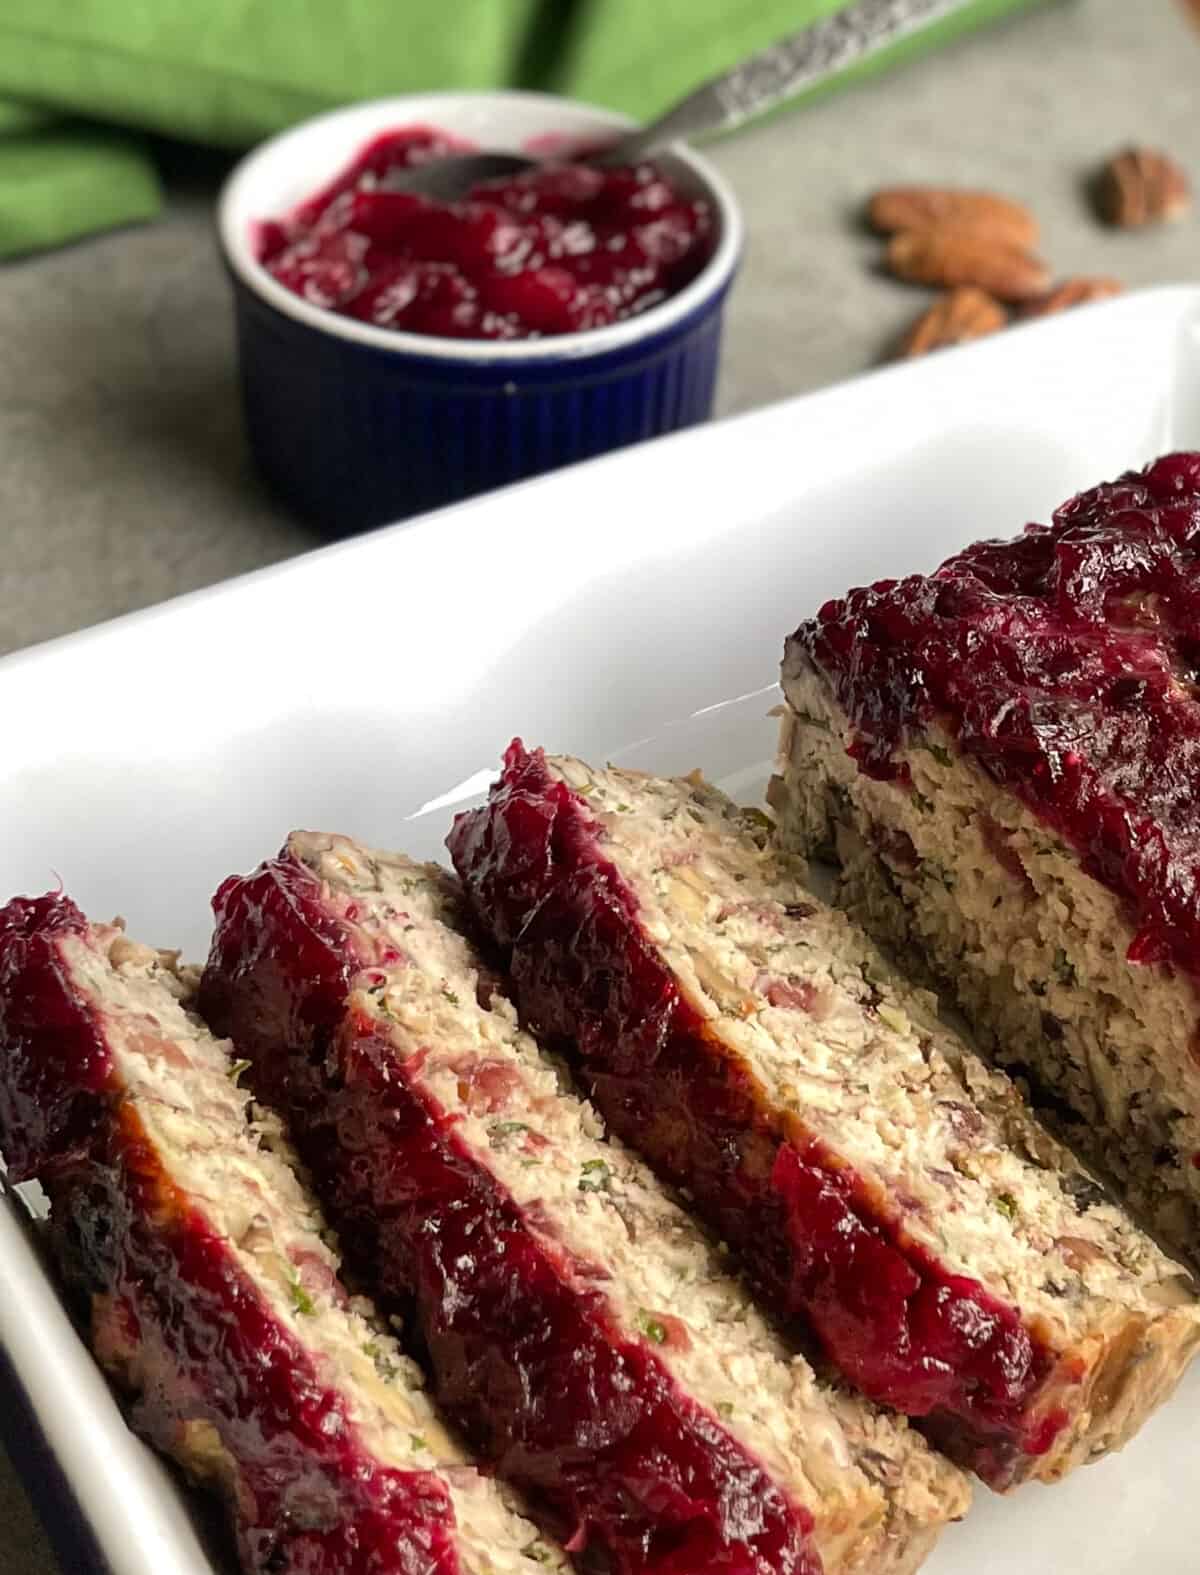 meatloaf glazed with cranberry sauce, a bowl of sauce, and some pecans.